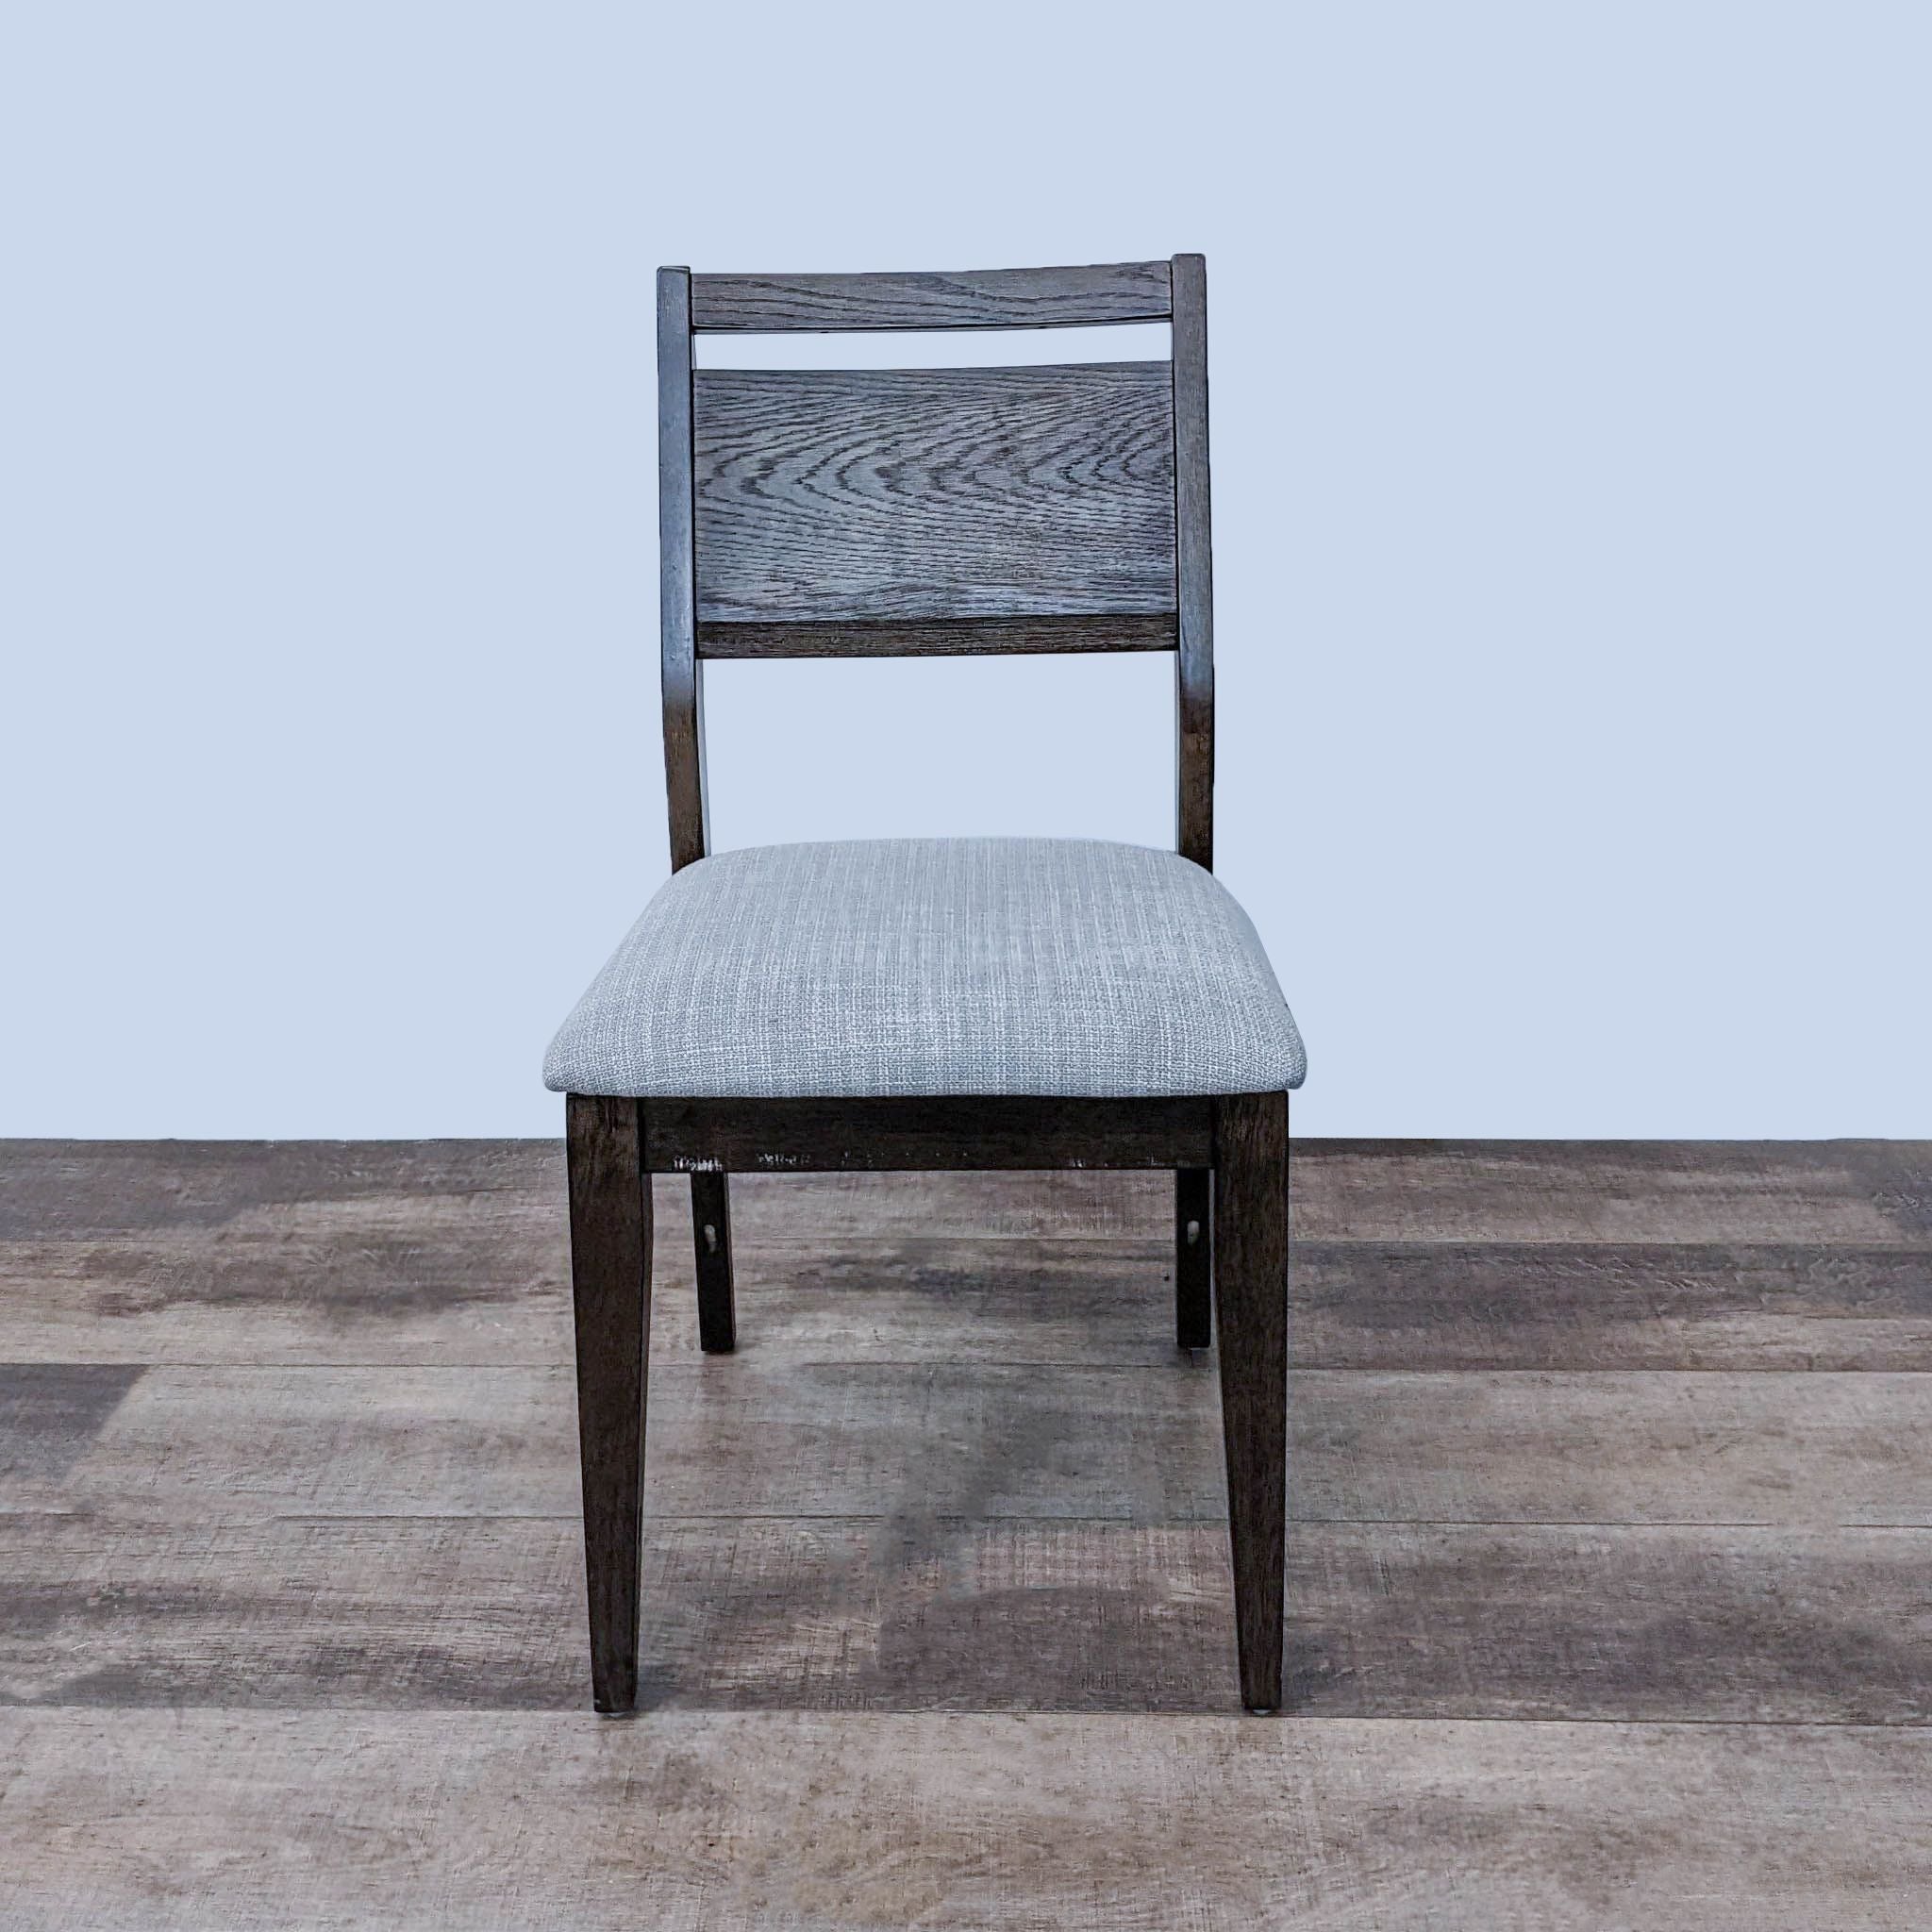 Reperch contemporary dining chair with dark wood frame and gray upholstered seat.